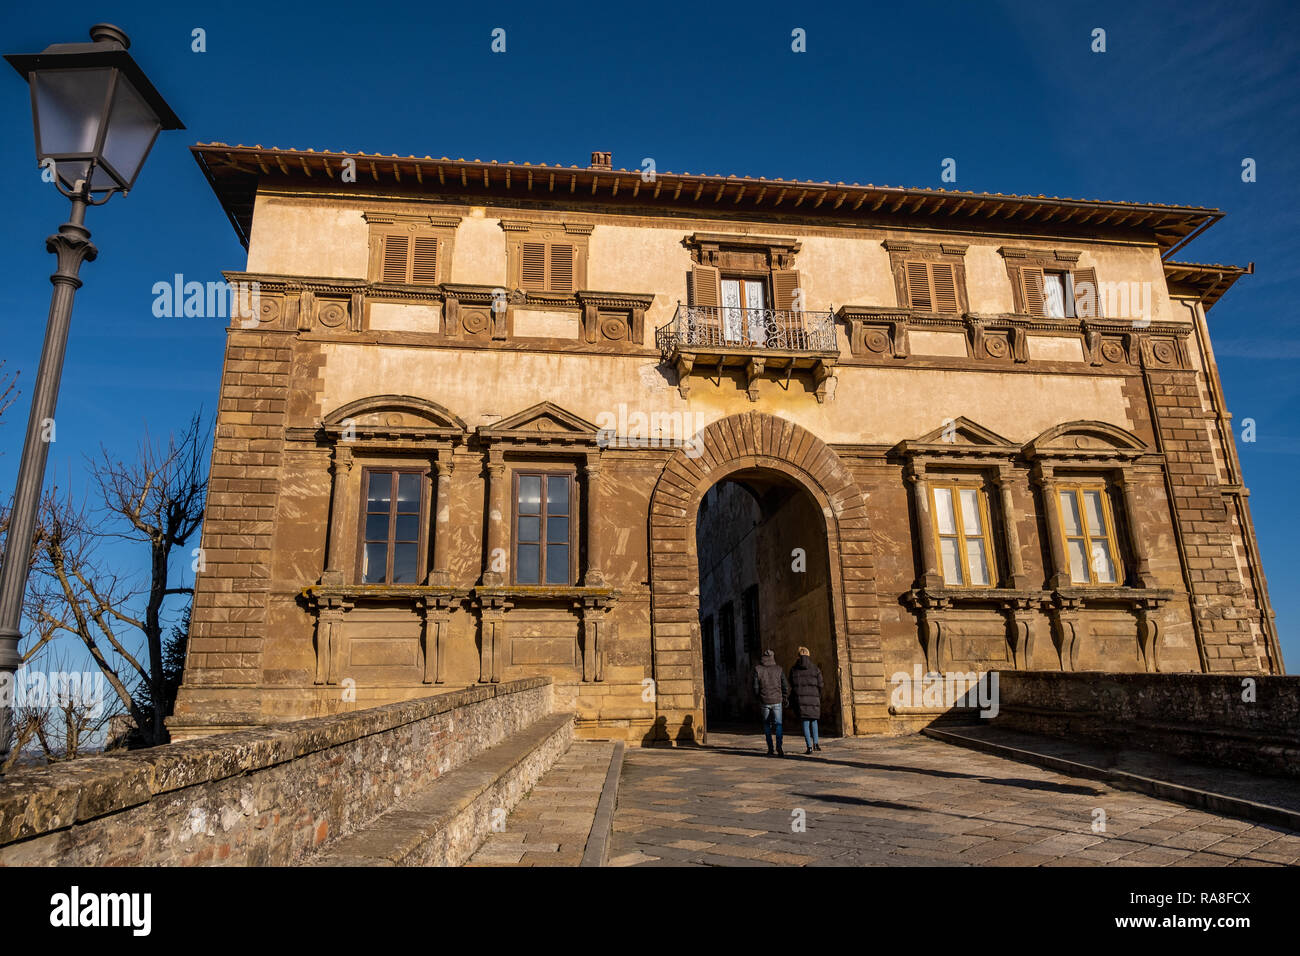 COLLE VAL D’ELSA, ITALY - DECEMBER 26, 2018: Palazzo Campana, the gateway to the oldest part of the town of Colle Val d'Elsa, Siena, Tuscany Stock Photo